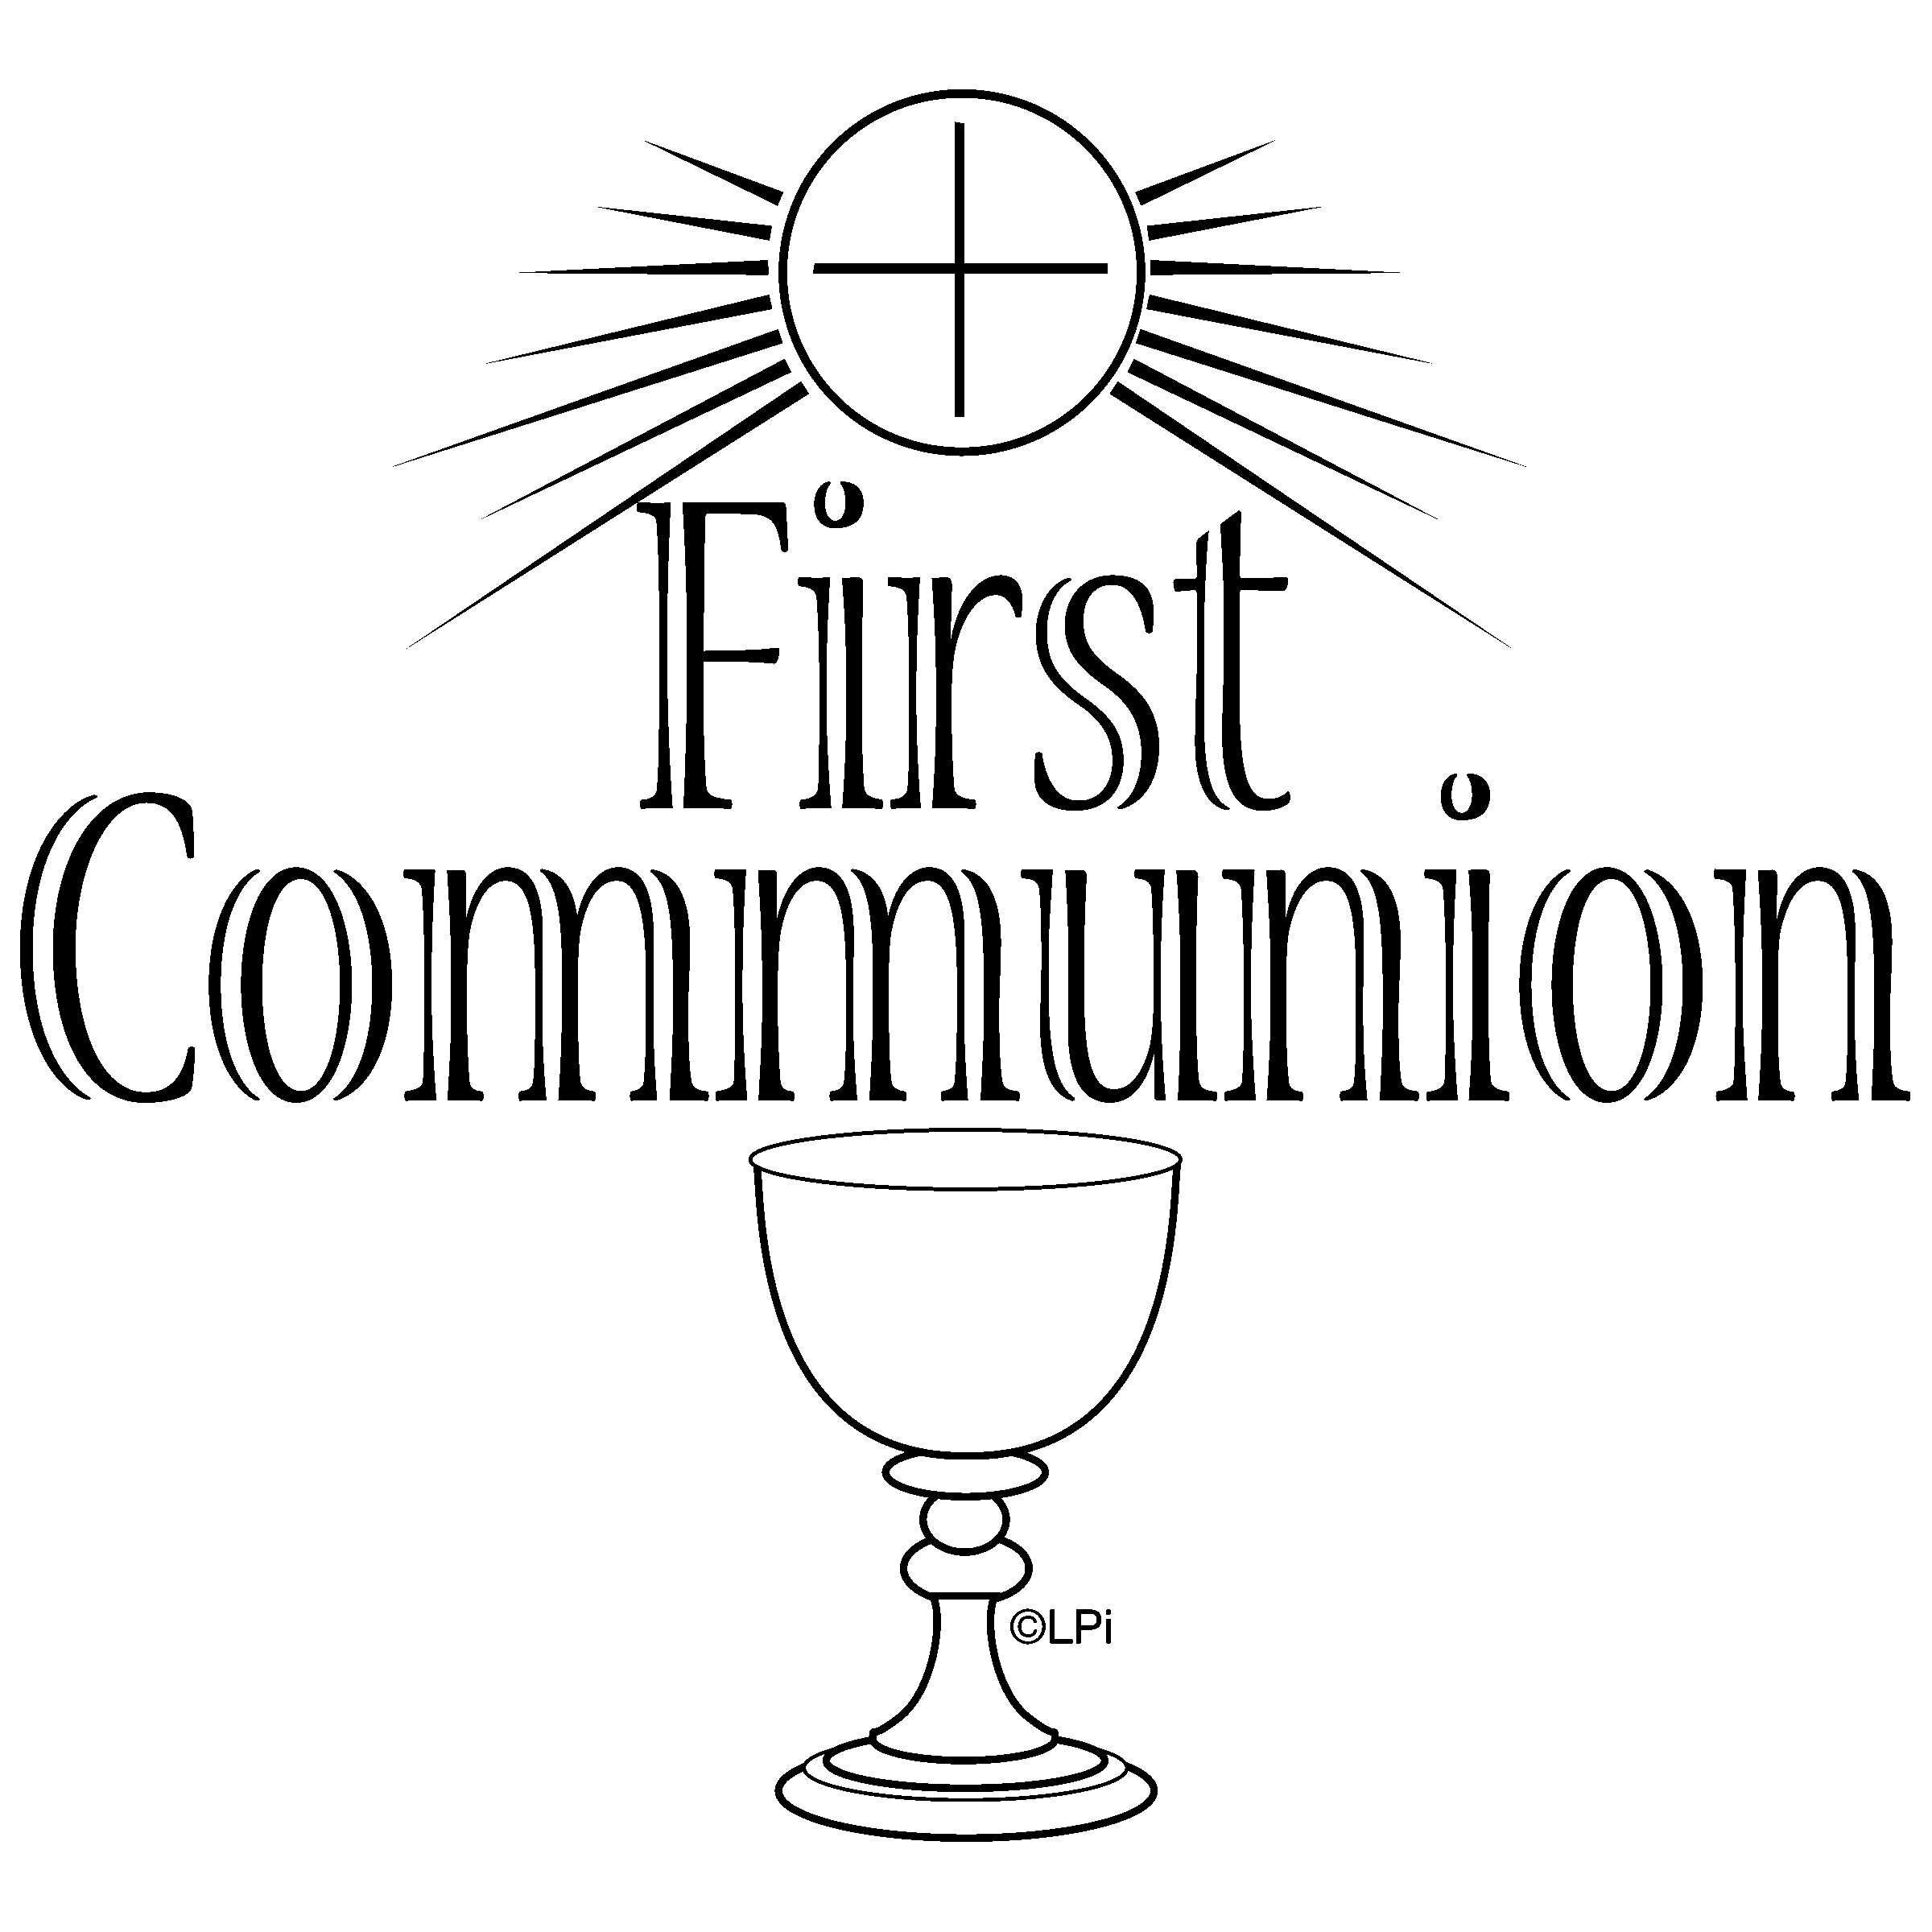 First Eucharist Worksheet | Printable Worksheets And Intended For First Communion Banner Templates